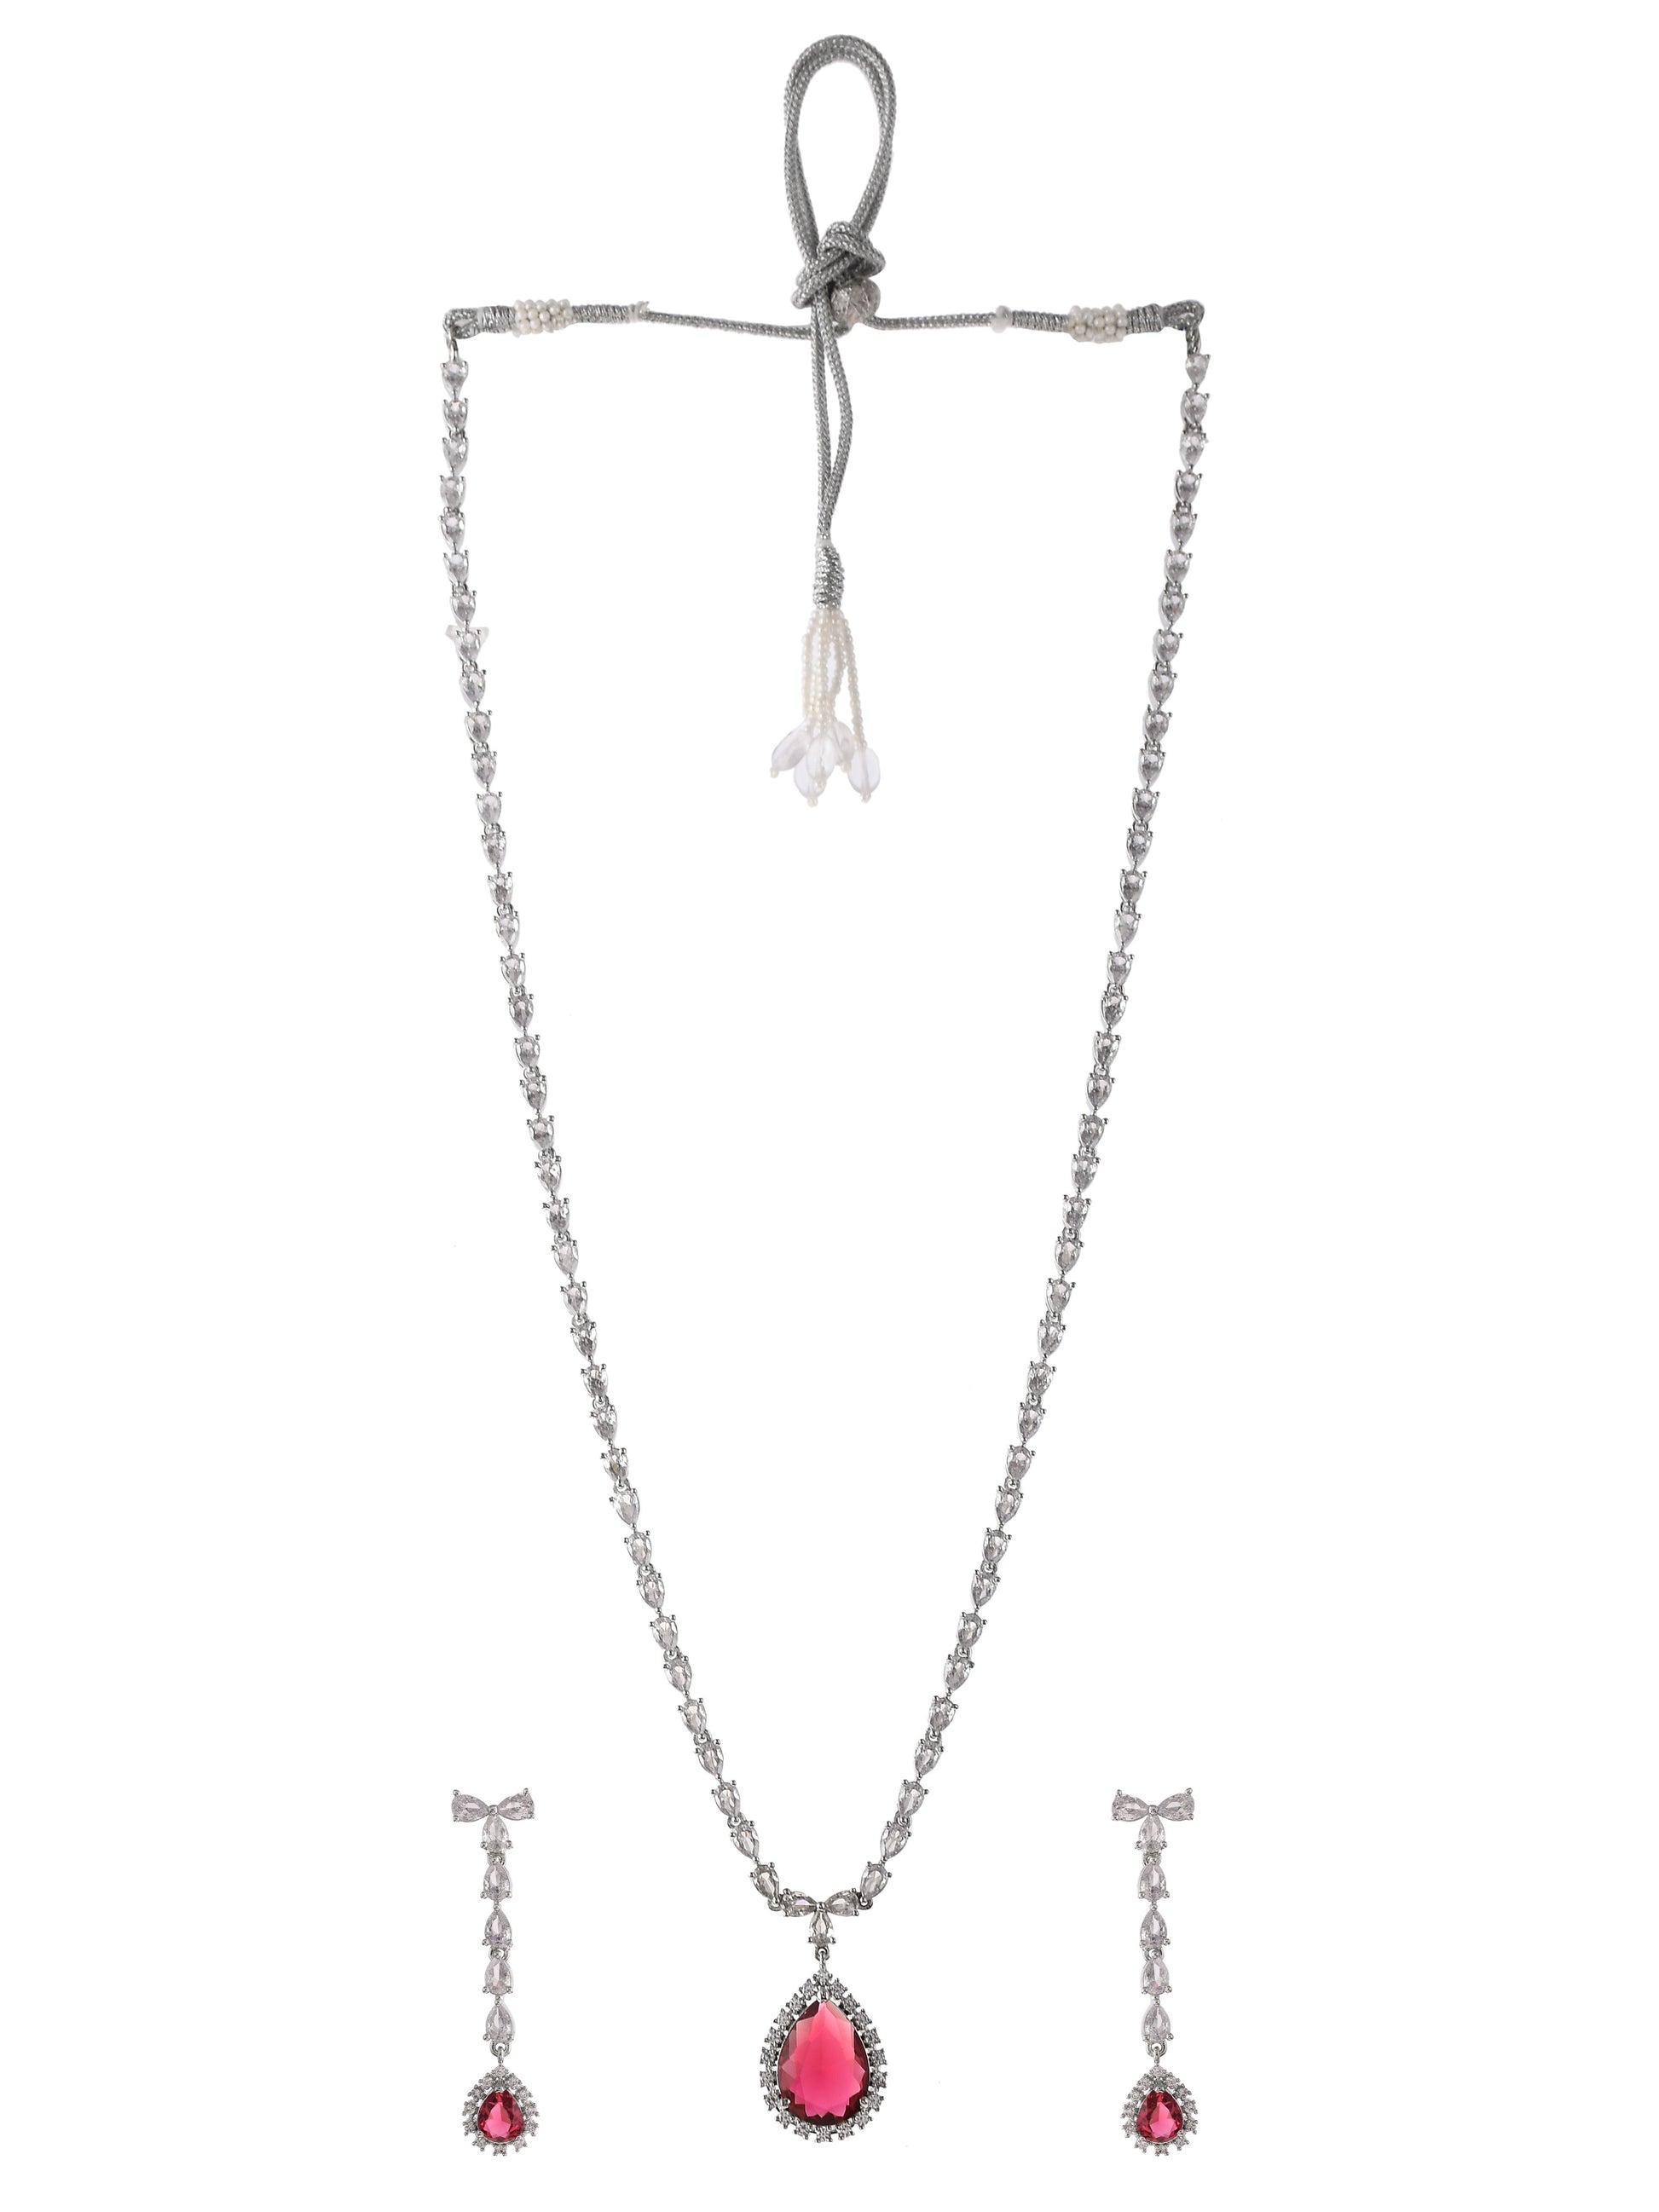 Silver Plated American Diamond Long Necklace Jewellery Set